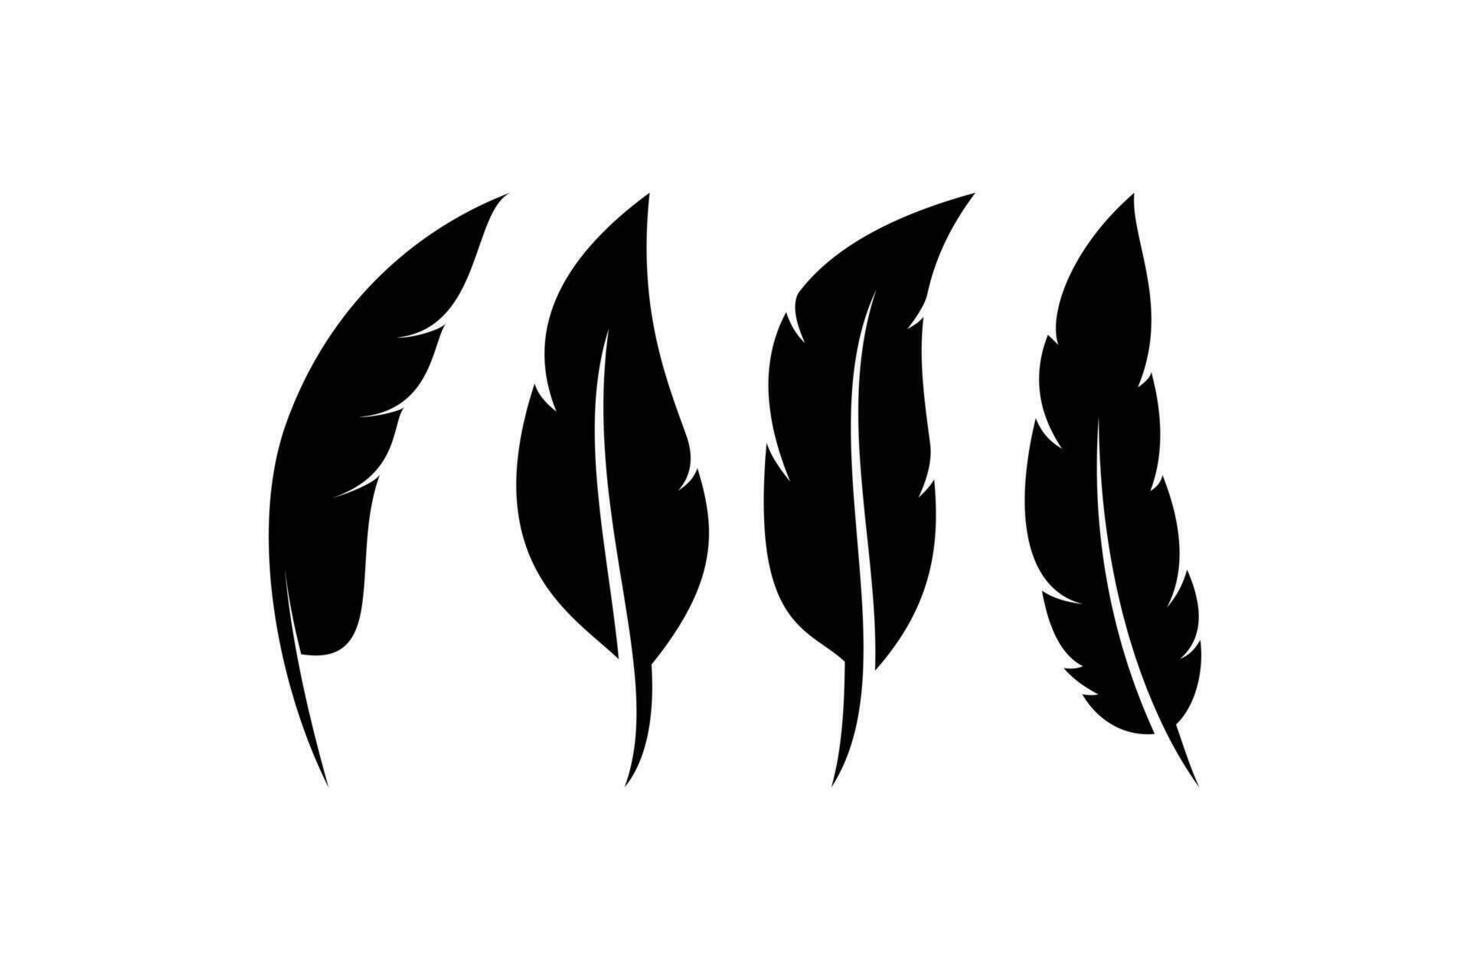 Feather vector icon logo collection. Silhouette feather pen symbol.